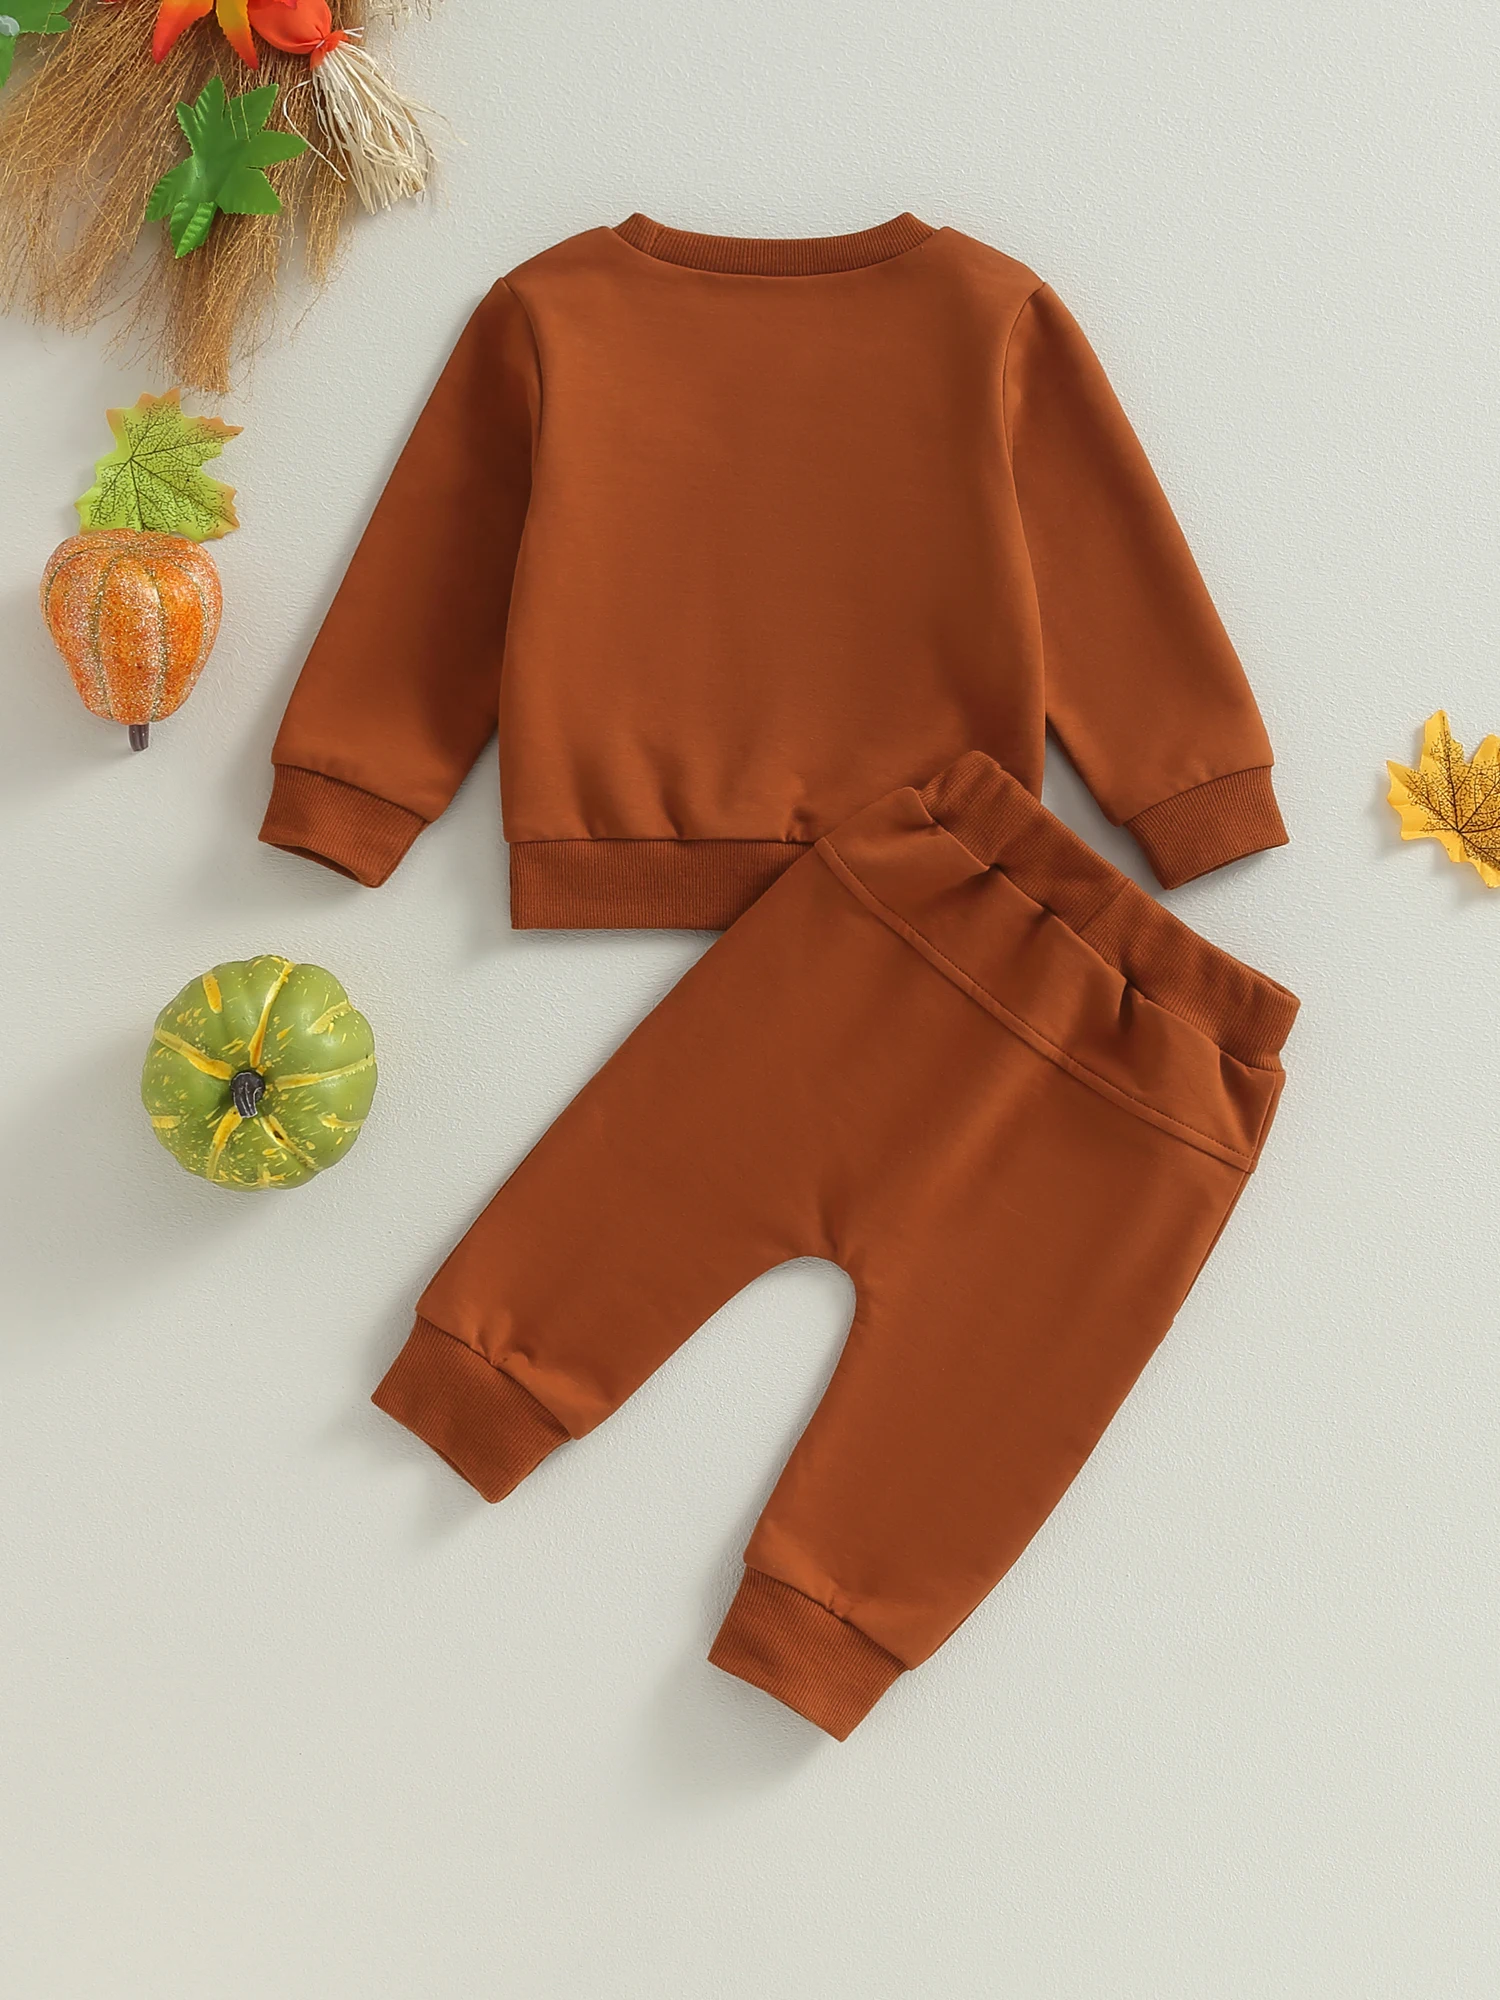 

Nie Cuimeiwan Baby Boy Girl Halloween Clothes Pumpkin Daily Oversized Sweatshirt Pants Set Fall Outfit (Wheat 6-12 Months)